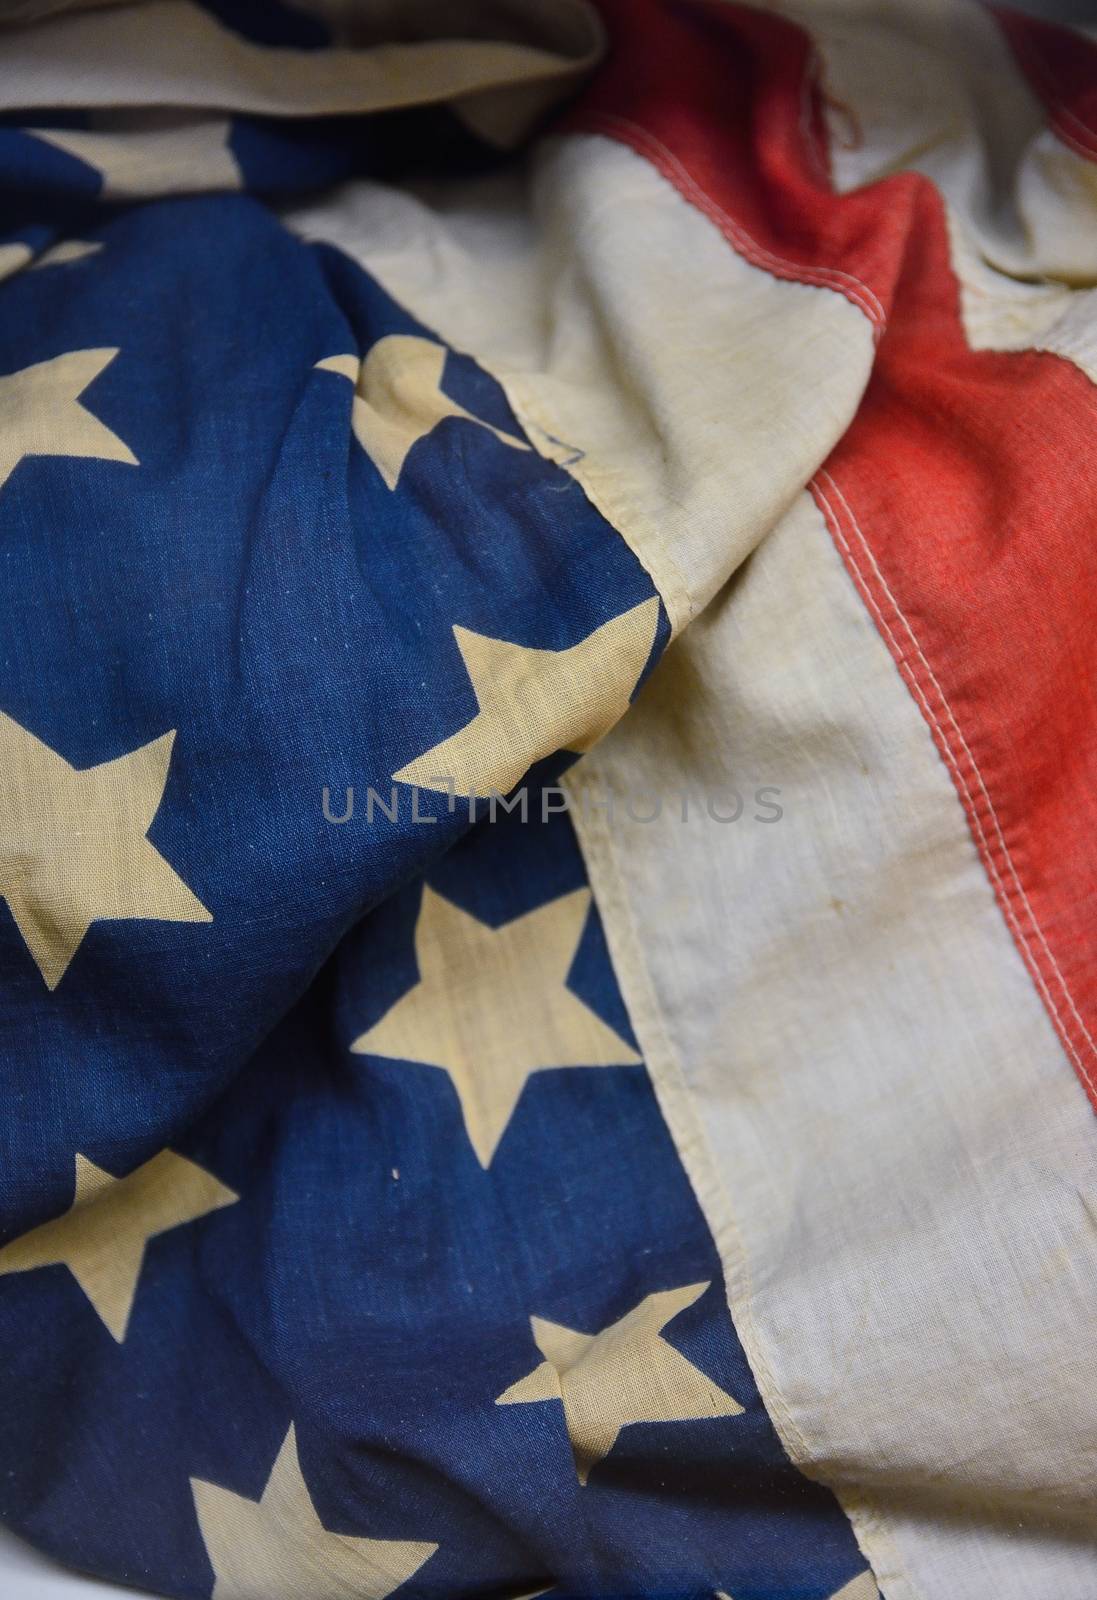 Old worn and dirty US flag